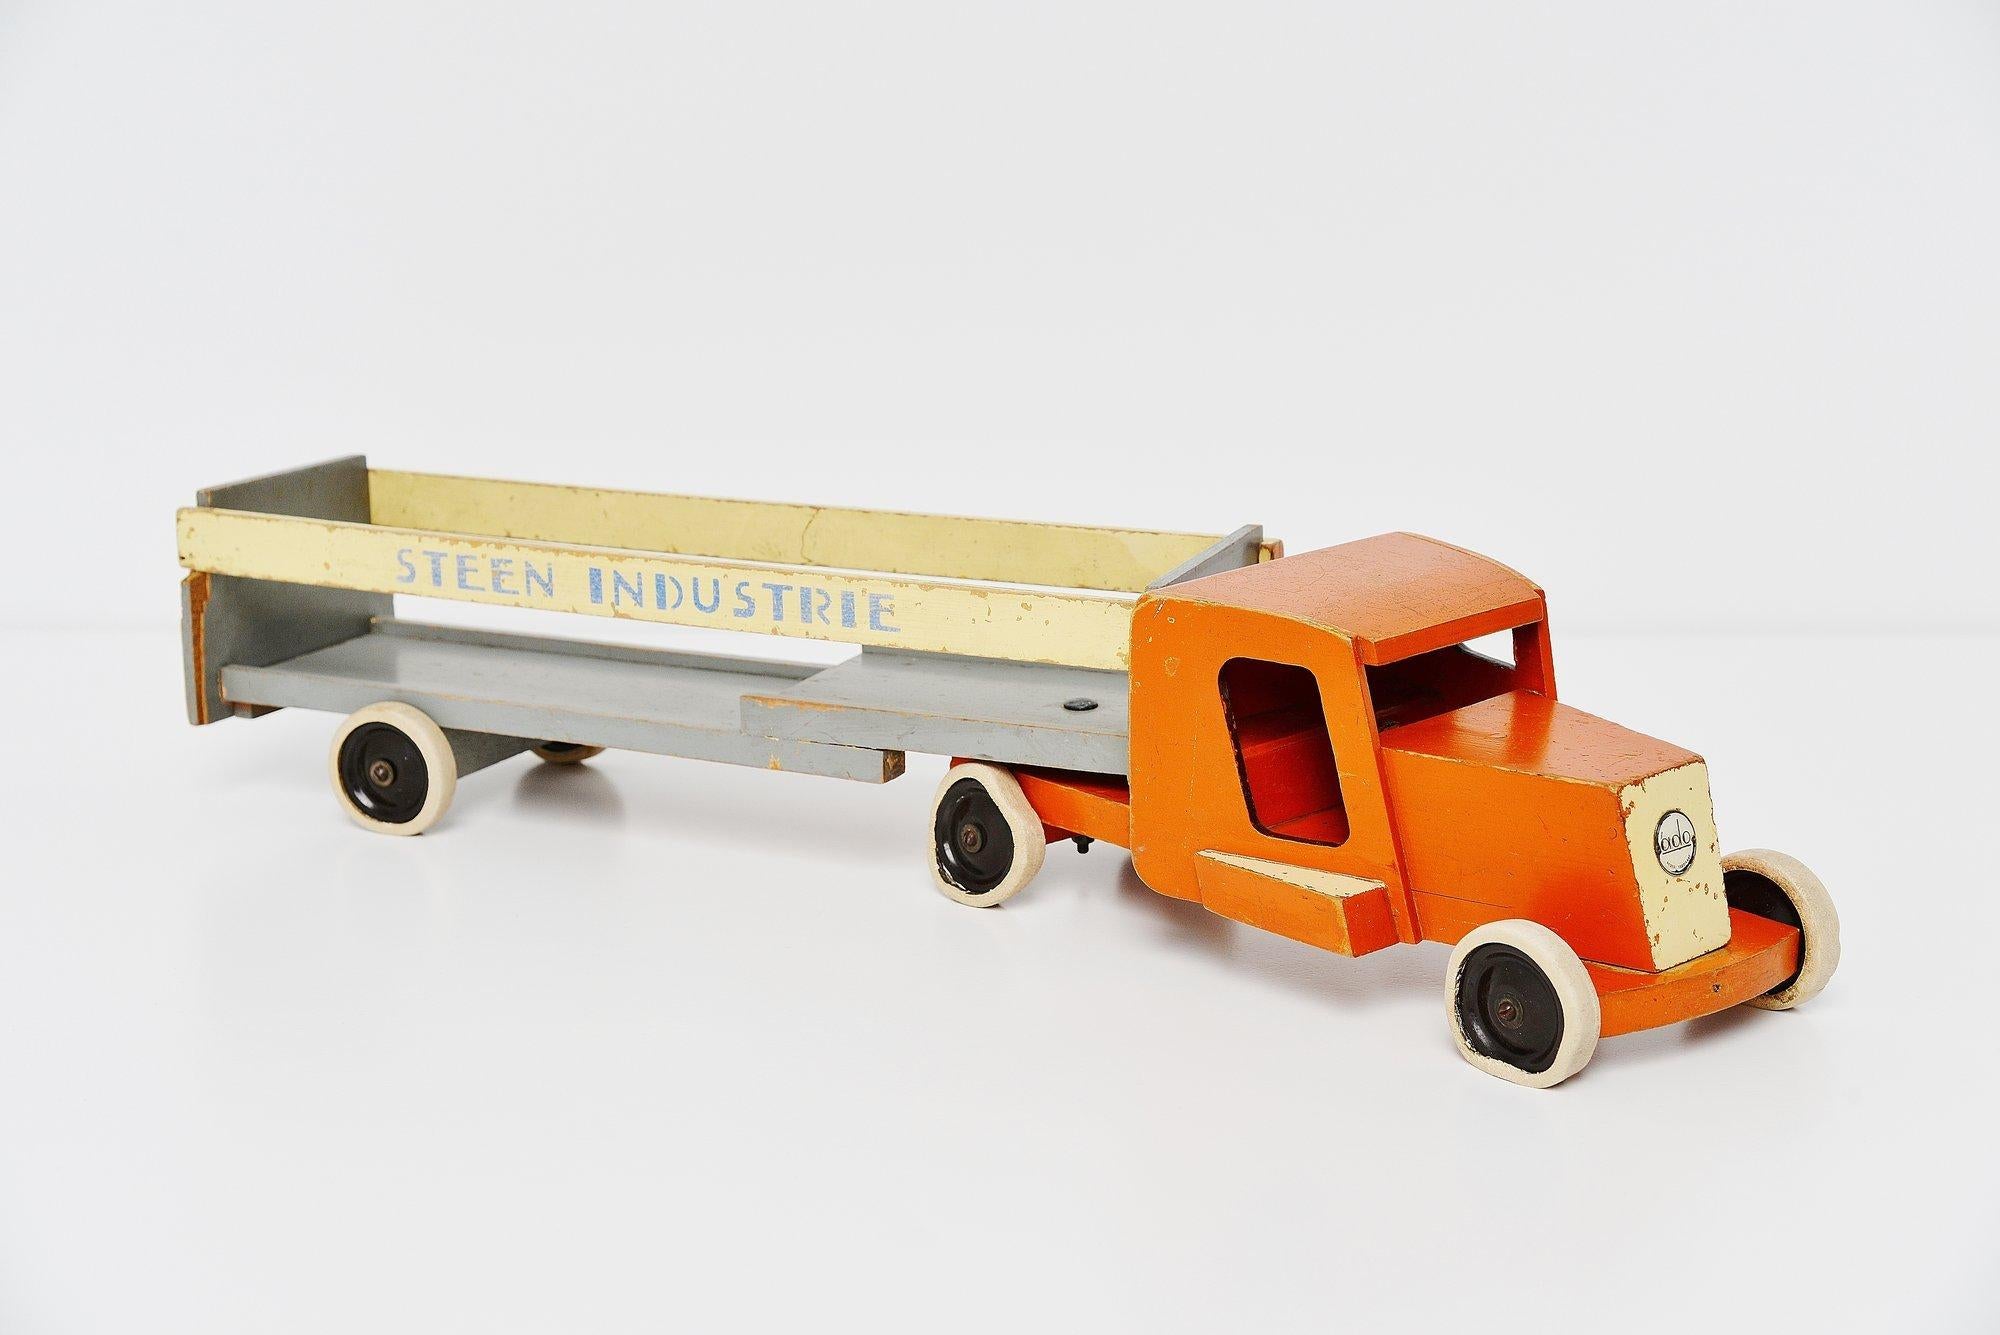 Very nice large ‘Steenindustrie’ (stone industry) toy truck designed by Ko Verzuu for Ado Holland in 1948. Ado means Arbeid door onvolwaardigen, translated; labour by incapacitated, which makes this an even more special piece. Toys by Ado are being